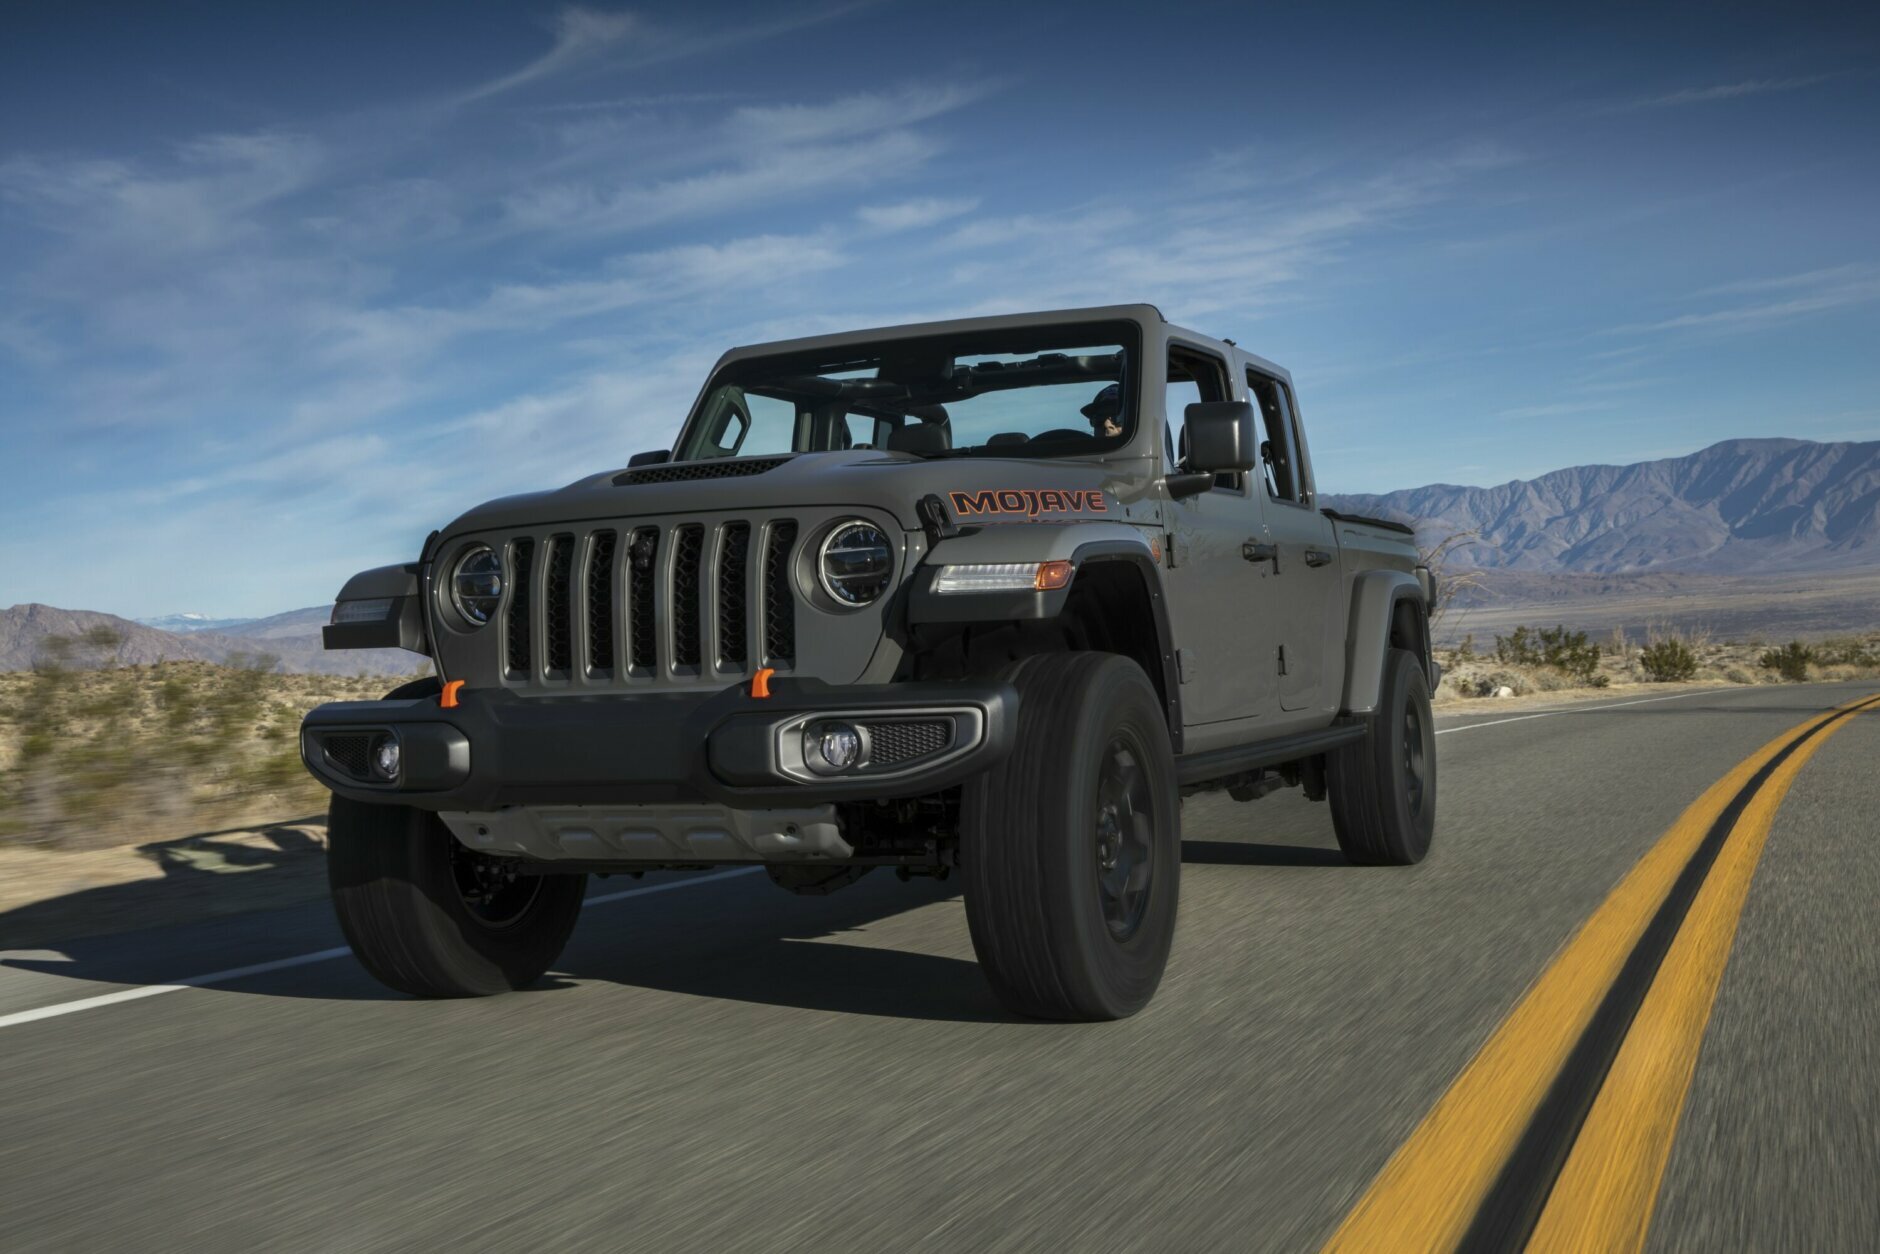 <h3><strong>2020 Jeep Gladiator</strong></h3>
<p><strong>Lease Deal: </strong>As low as $209 per month for 36 months with $2,629 due at signing</p>
